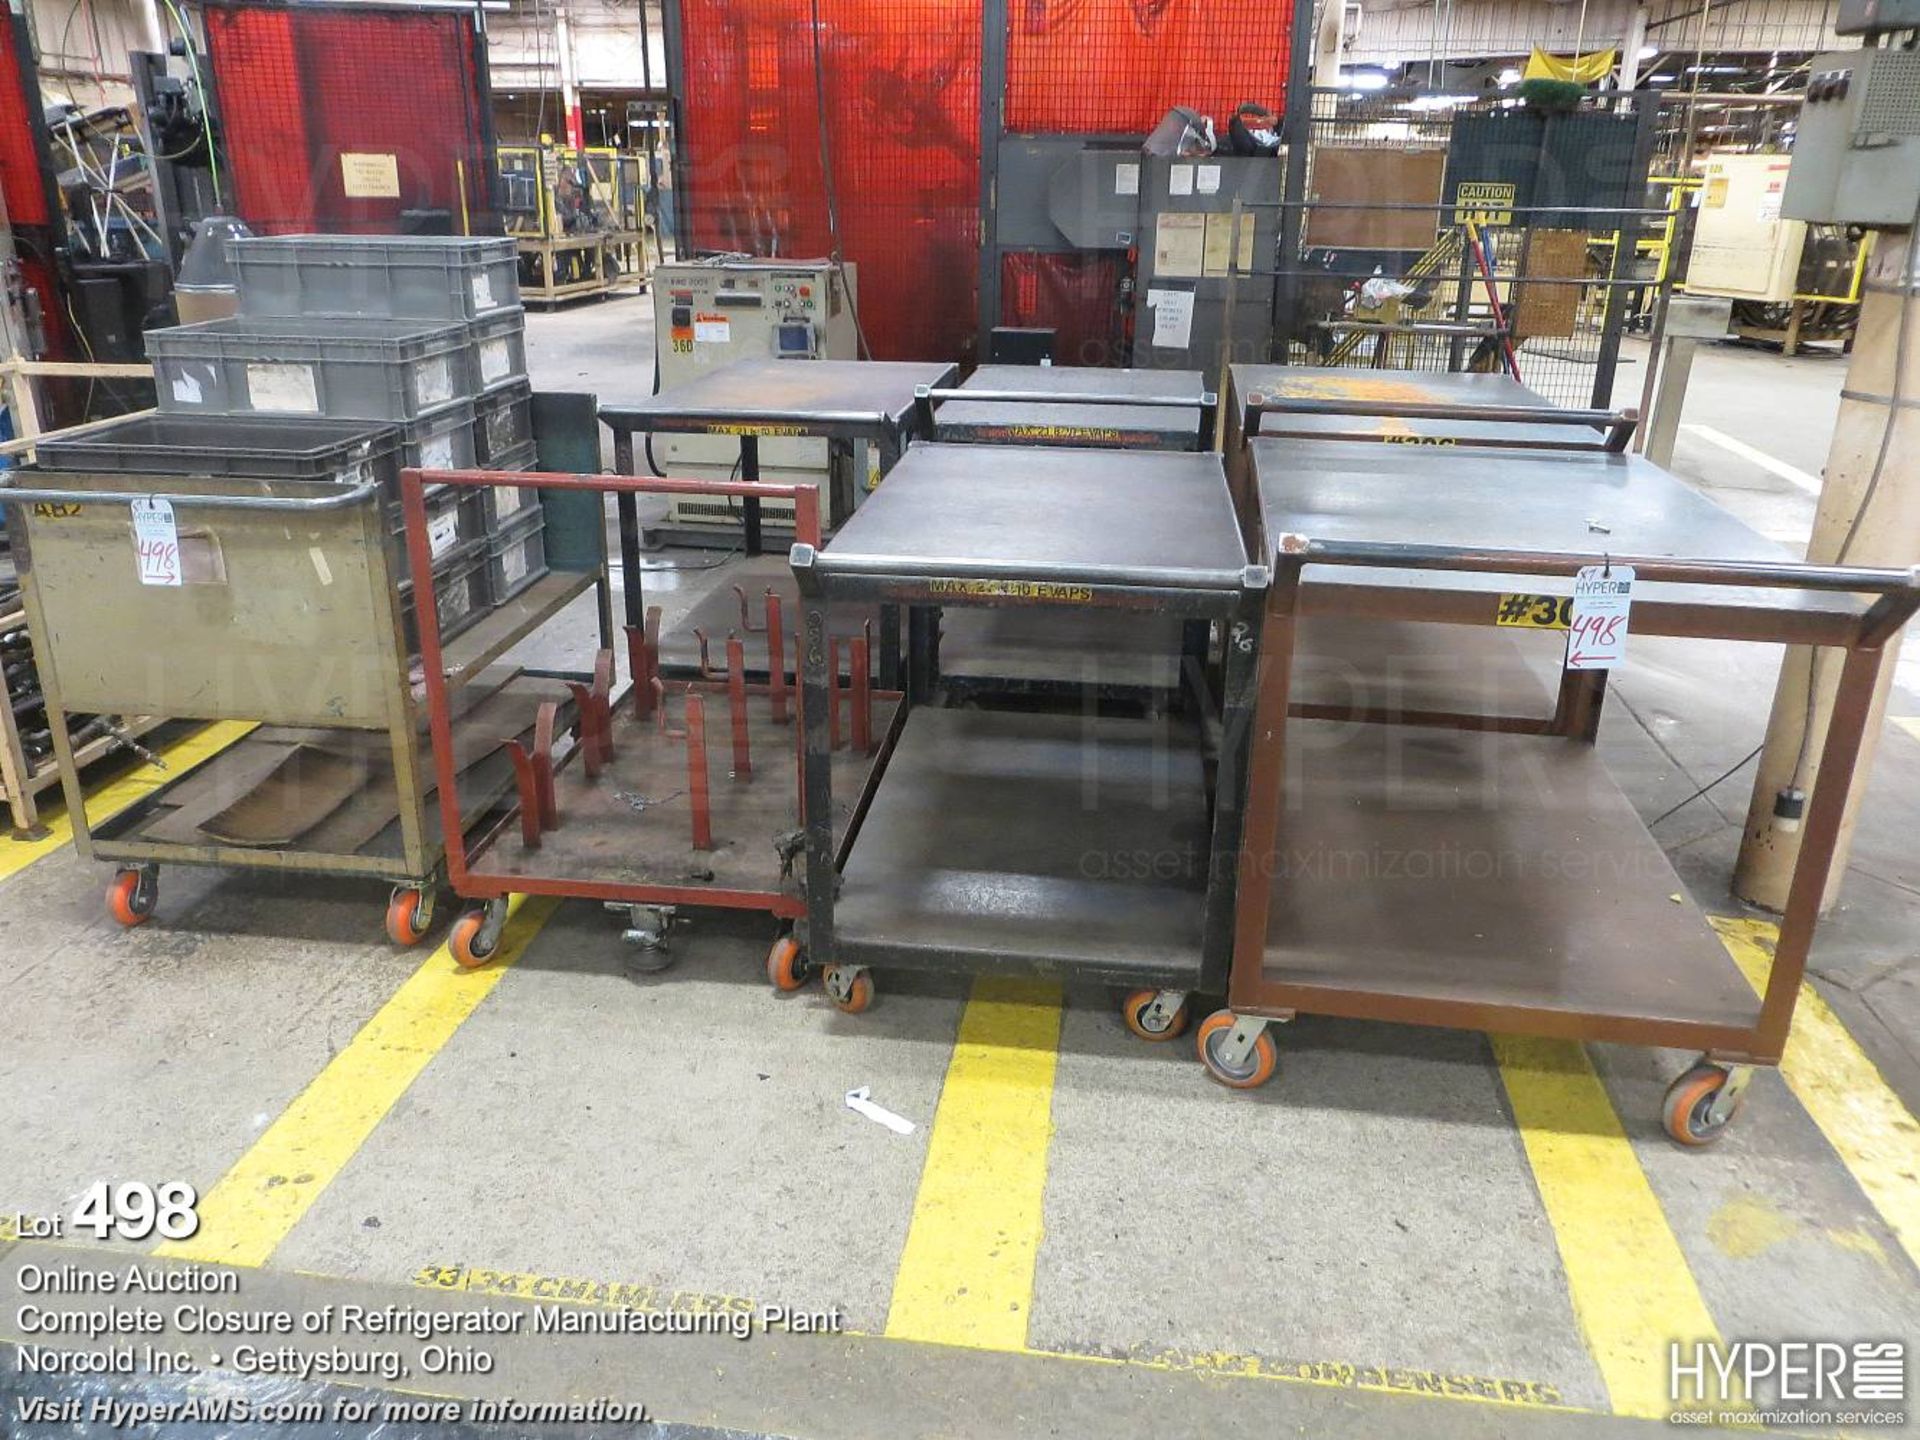 (7) various steel carts and approx. (12) smal